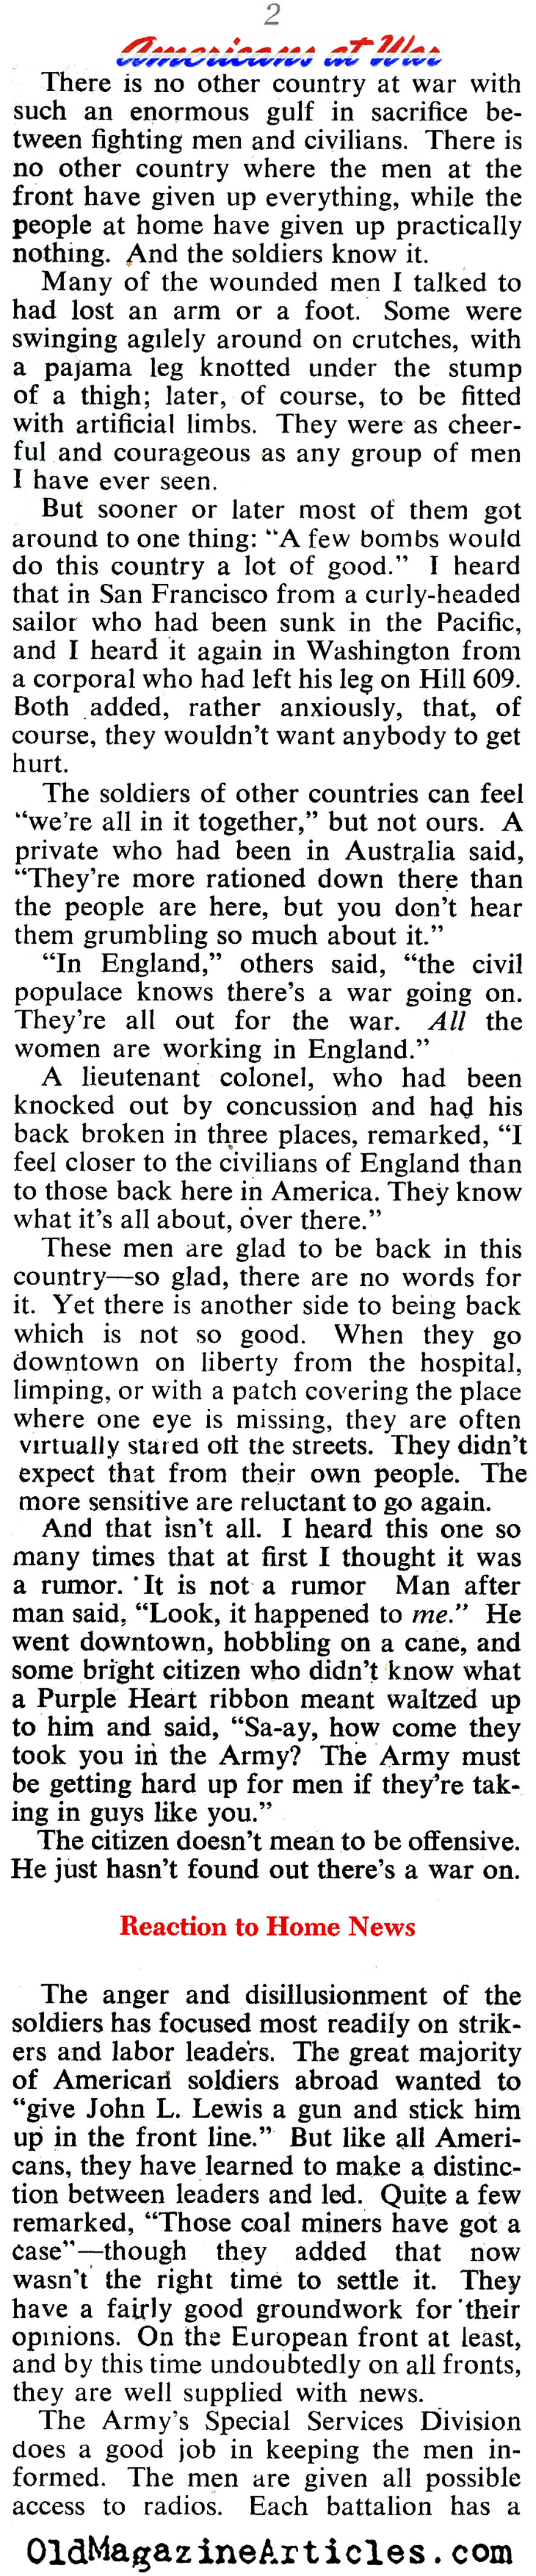 Soldiers Speak-Out About the Home Front (Collier's Magazine, 1943)